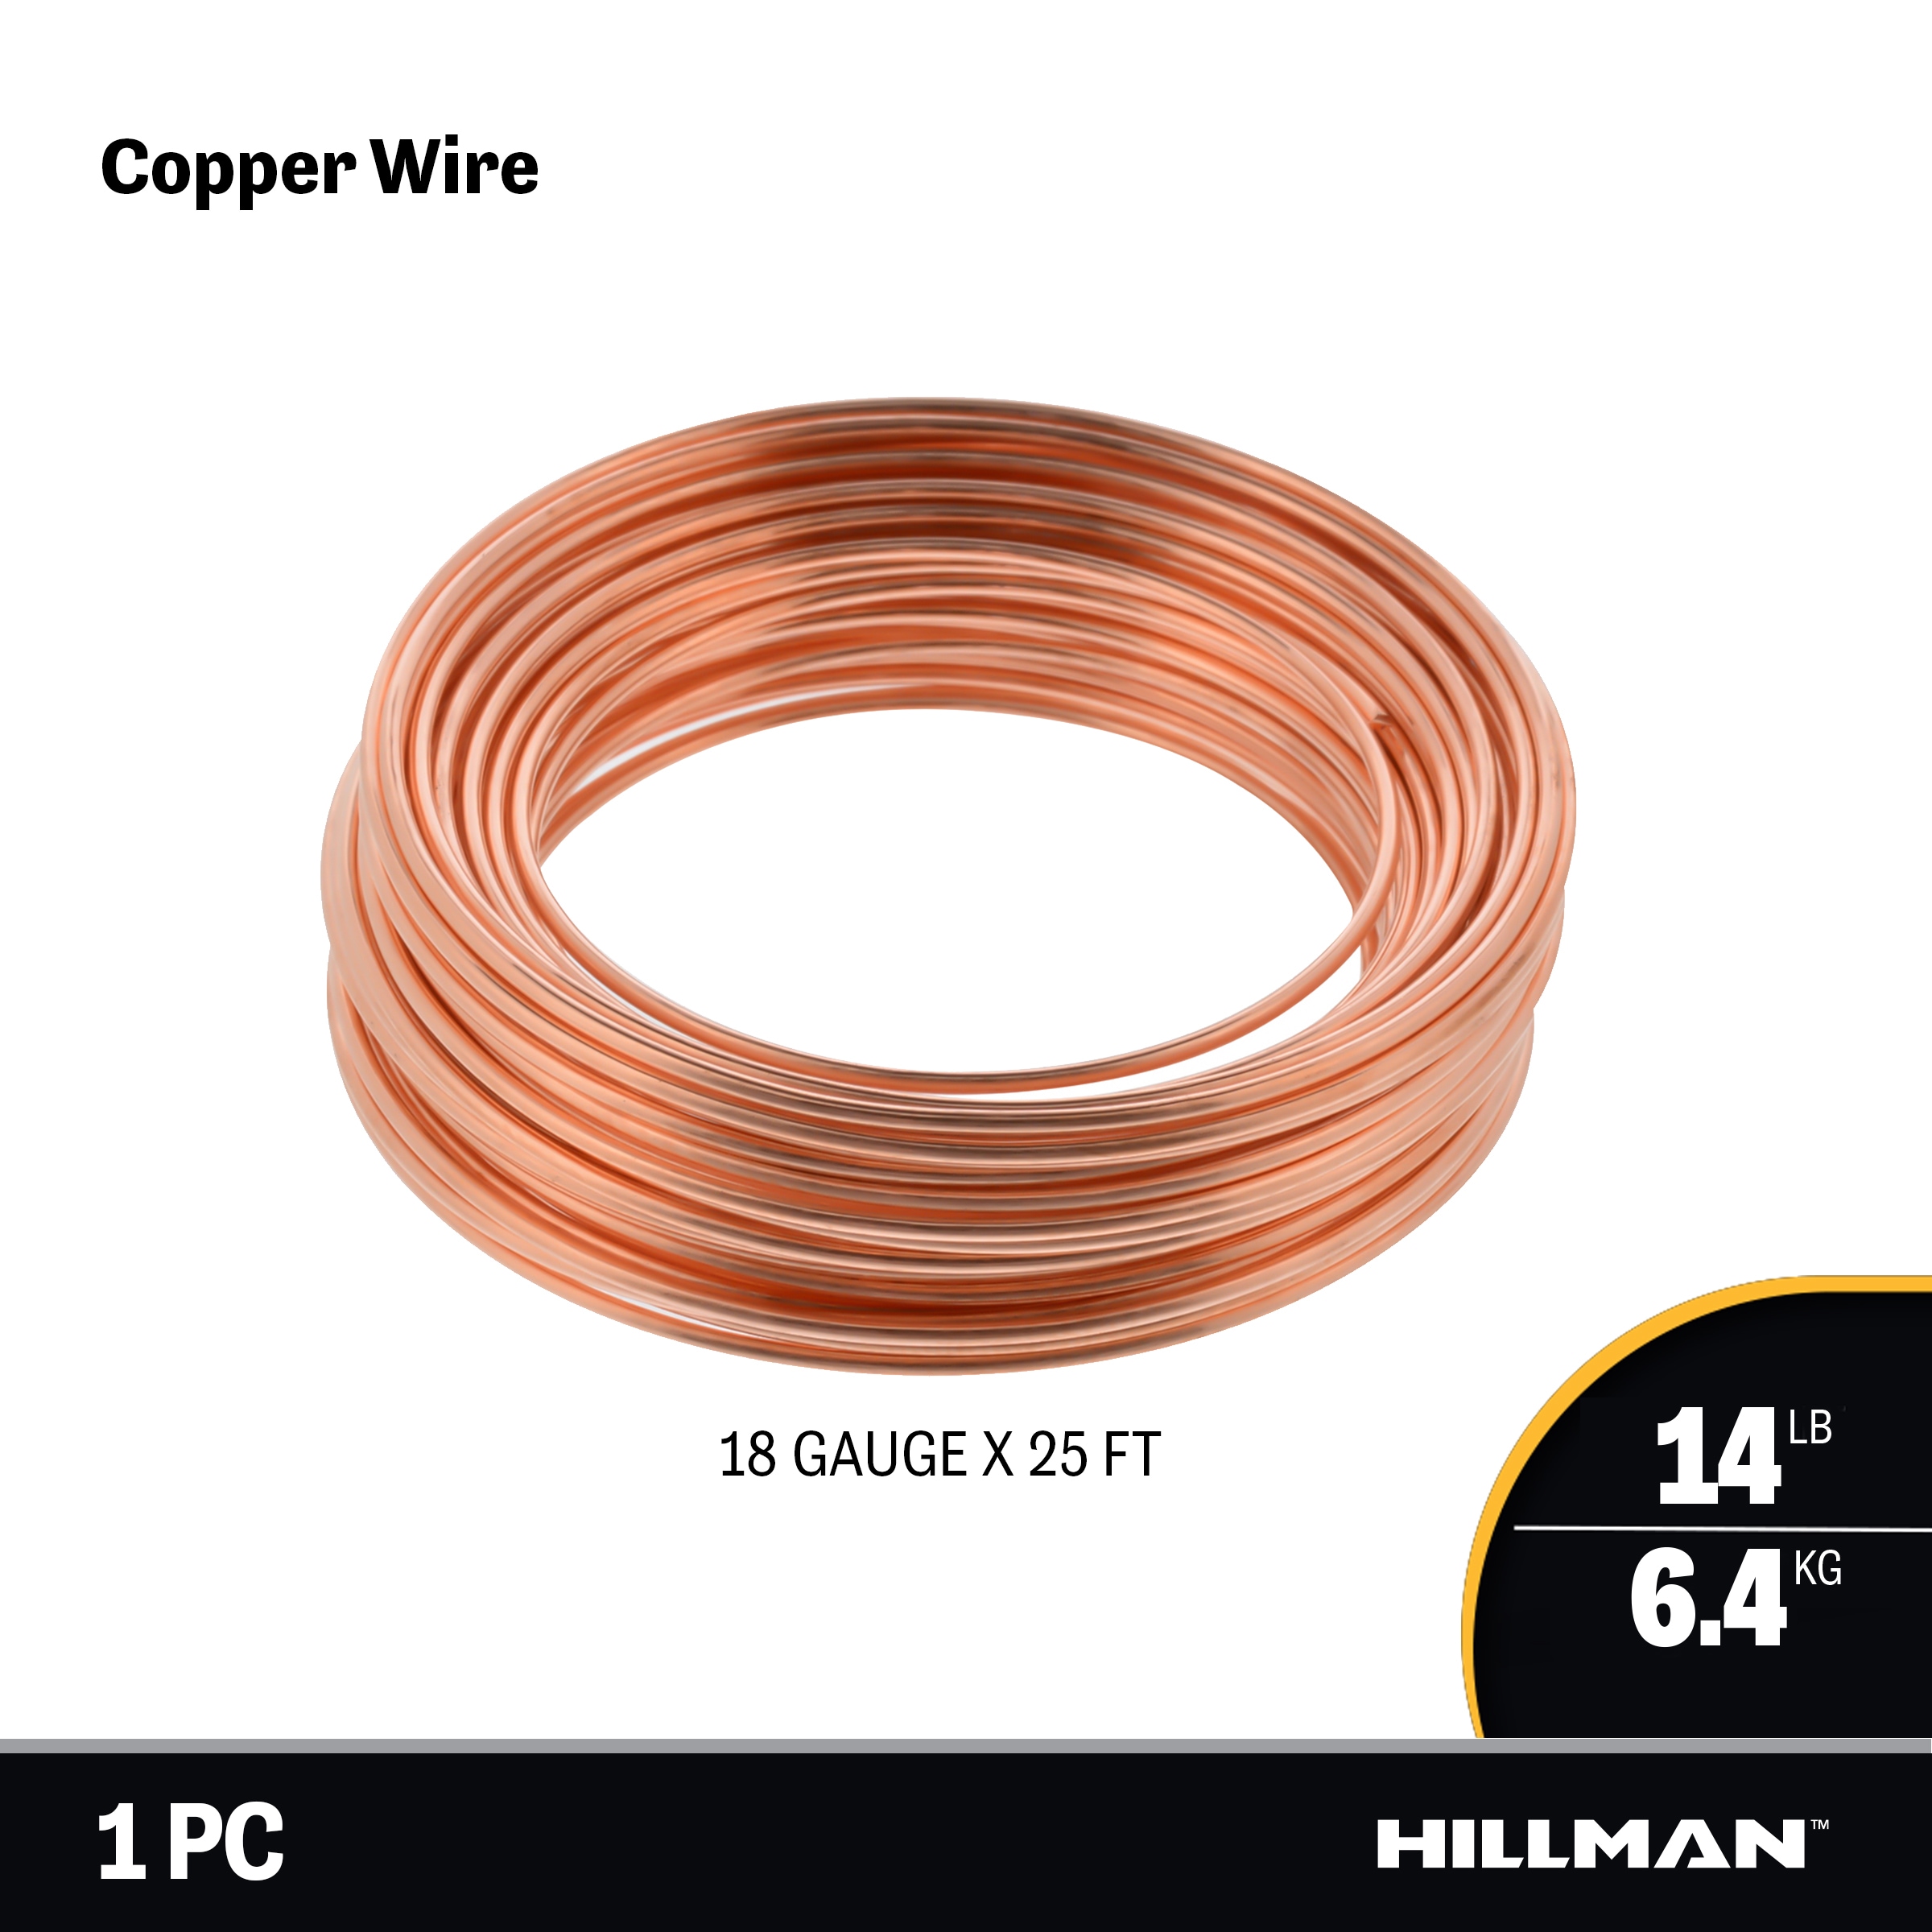 28 AWG Solid Enameled Bare Copper Magnet Wire - 1/4 lb Spool